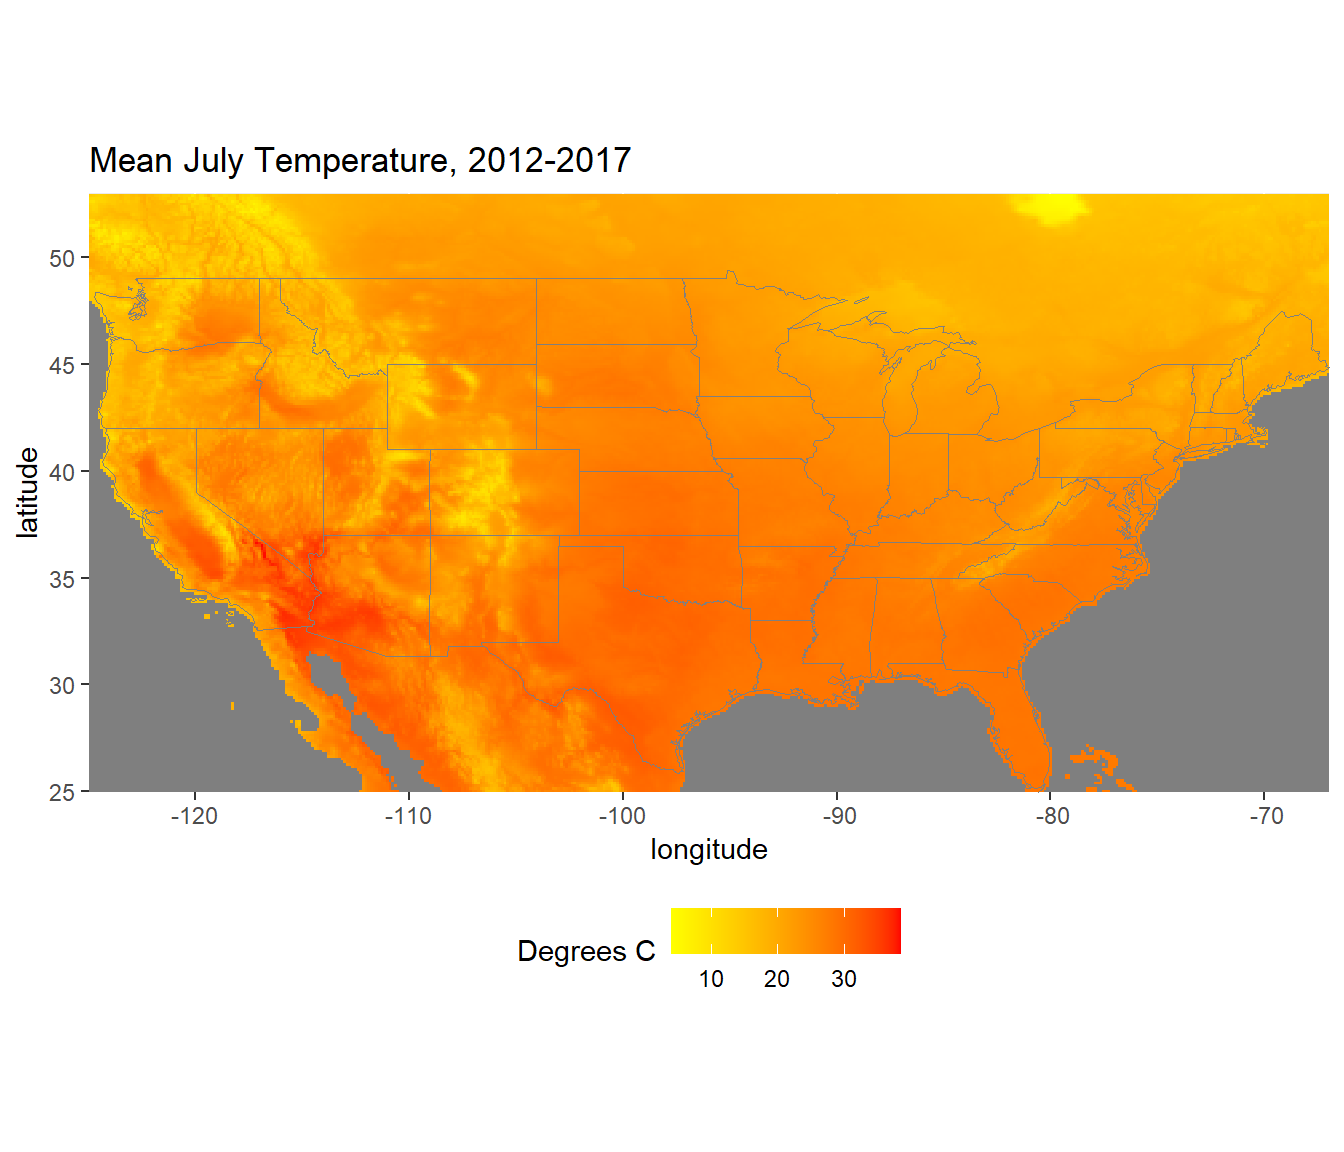 Mean July temperatures calculated from 2012-2017.